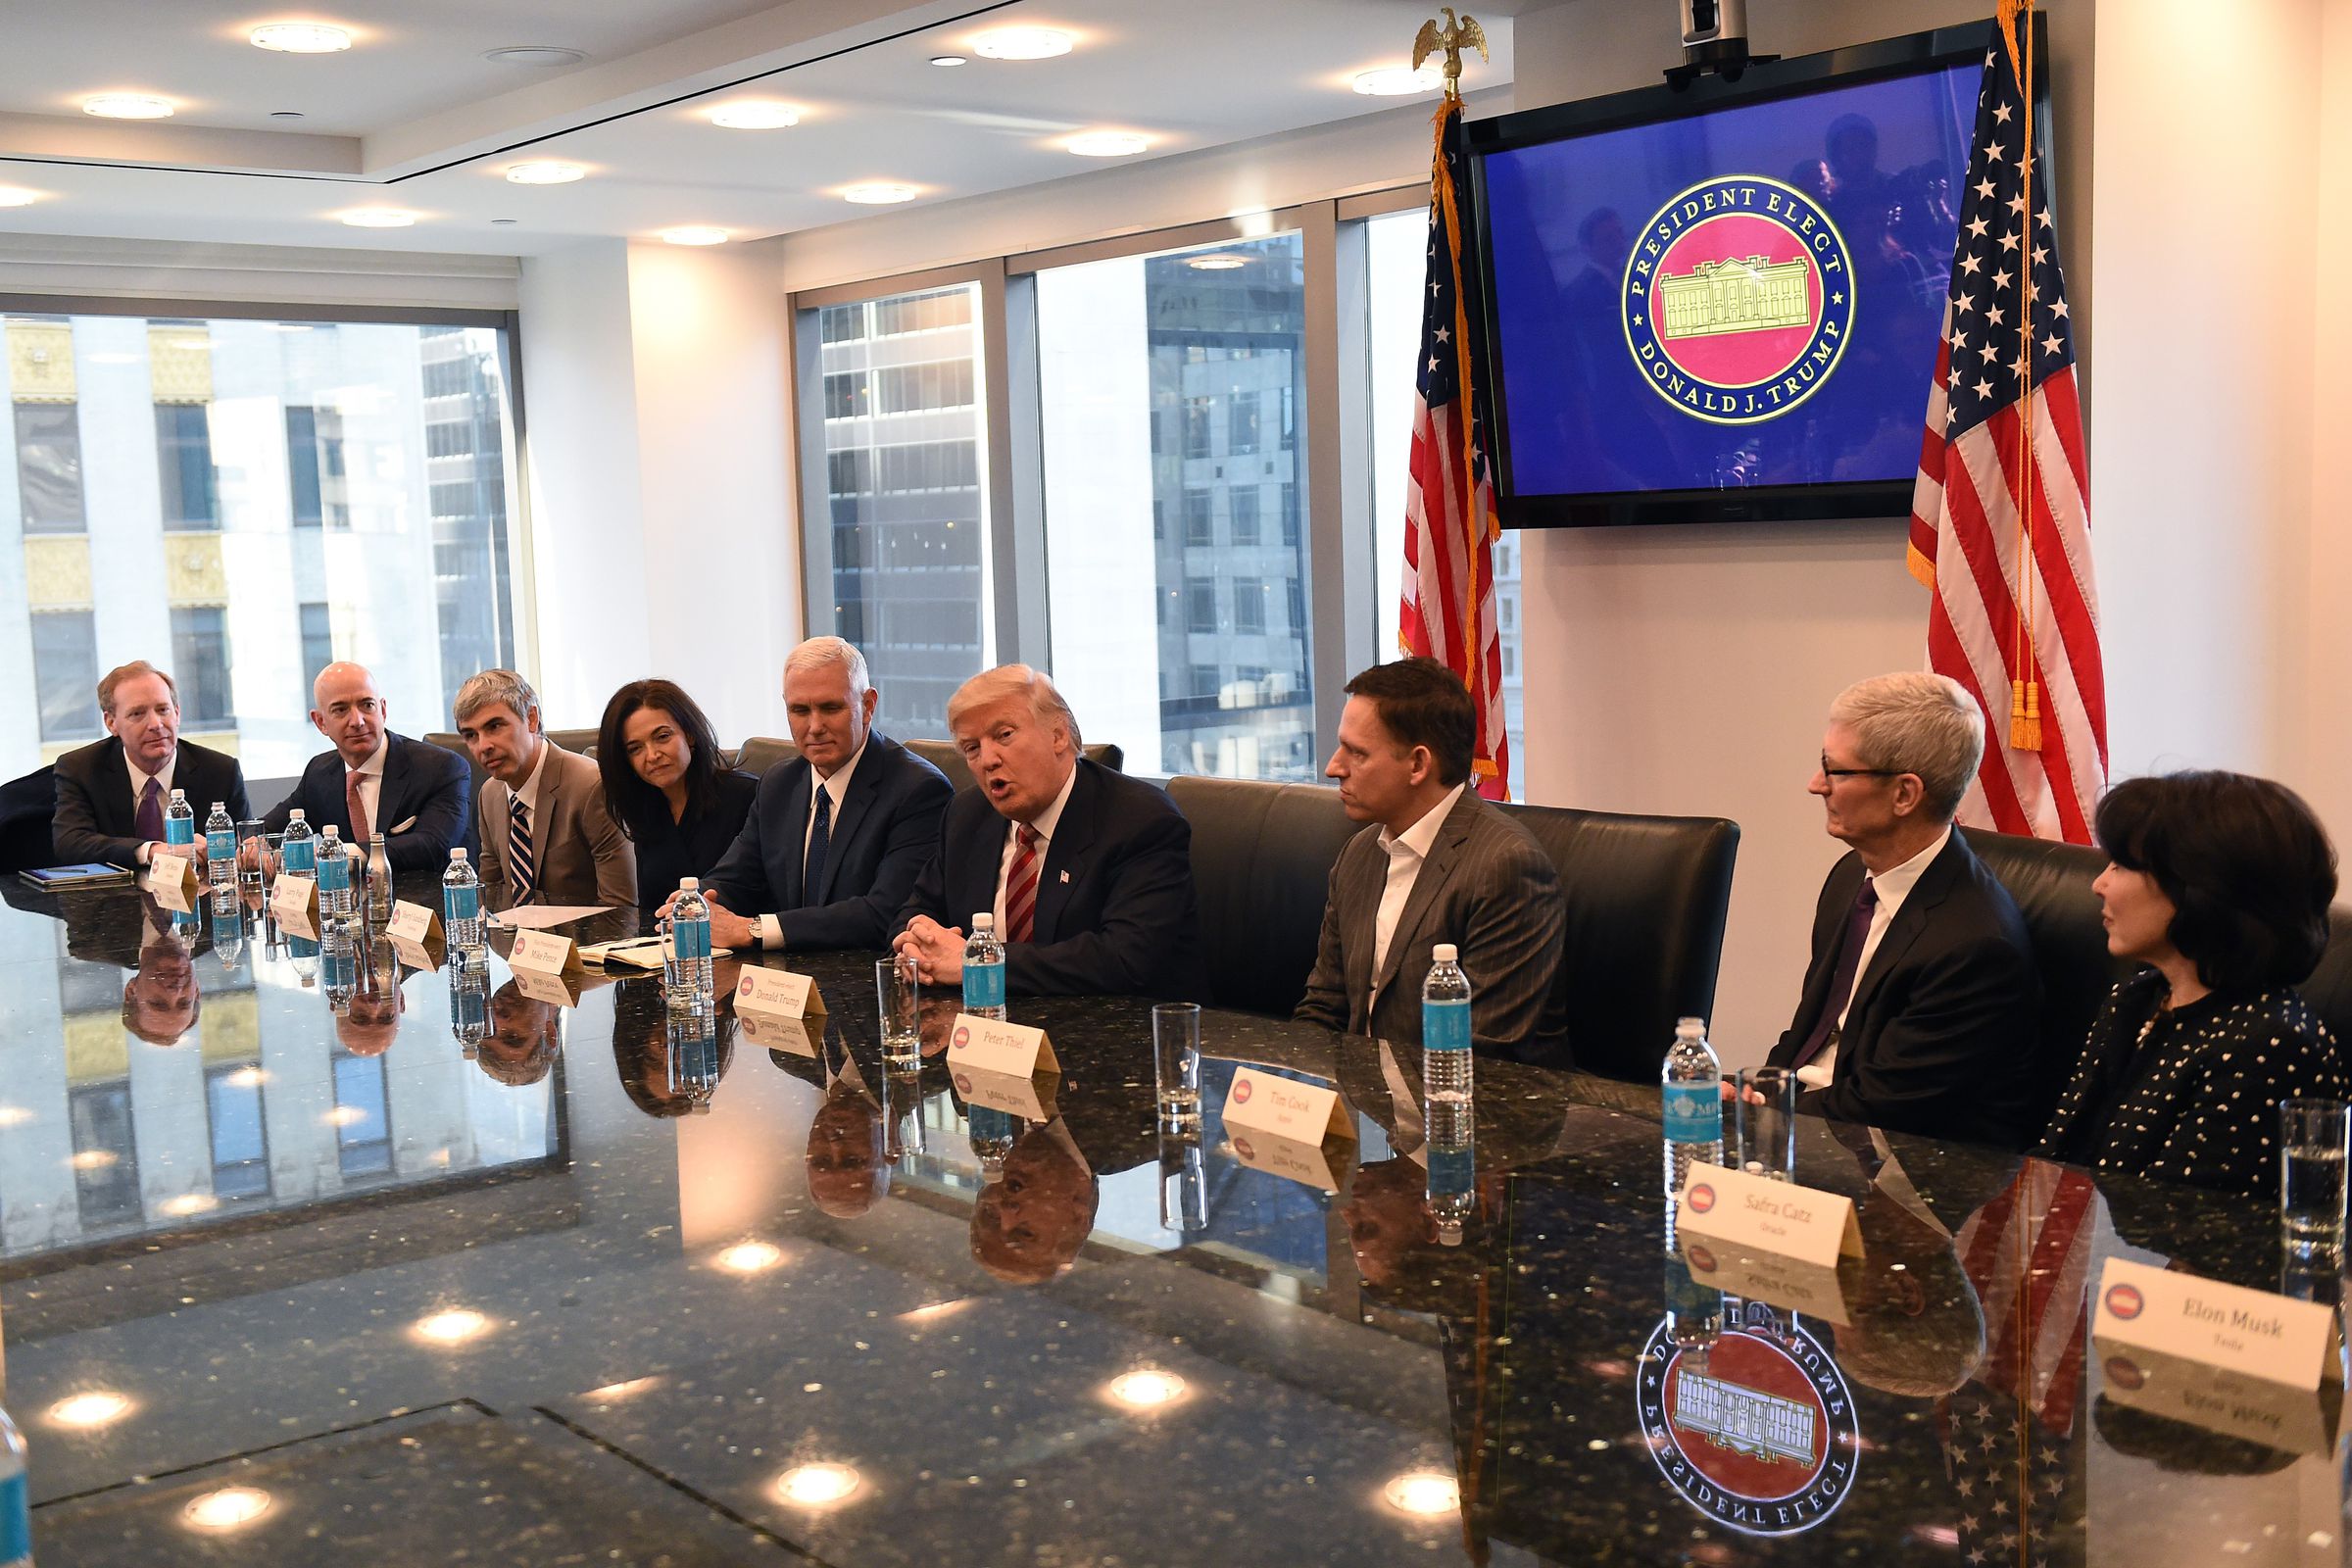 Amazon's chief Jeff Bezos, Larry Page of Alphabet, Facebook COO Sheryl Sandberg, Vice President elect Mike Pence, President-elect Donald Trump, Peter Thiel, co-founder and former CEO of PayPal, Tim Cook of Apple and Safra Catz of Oracle attend a meeting a